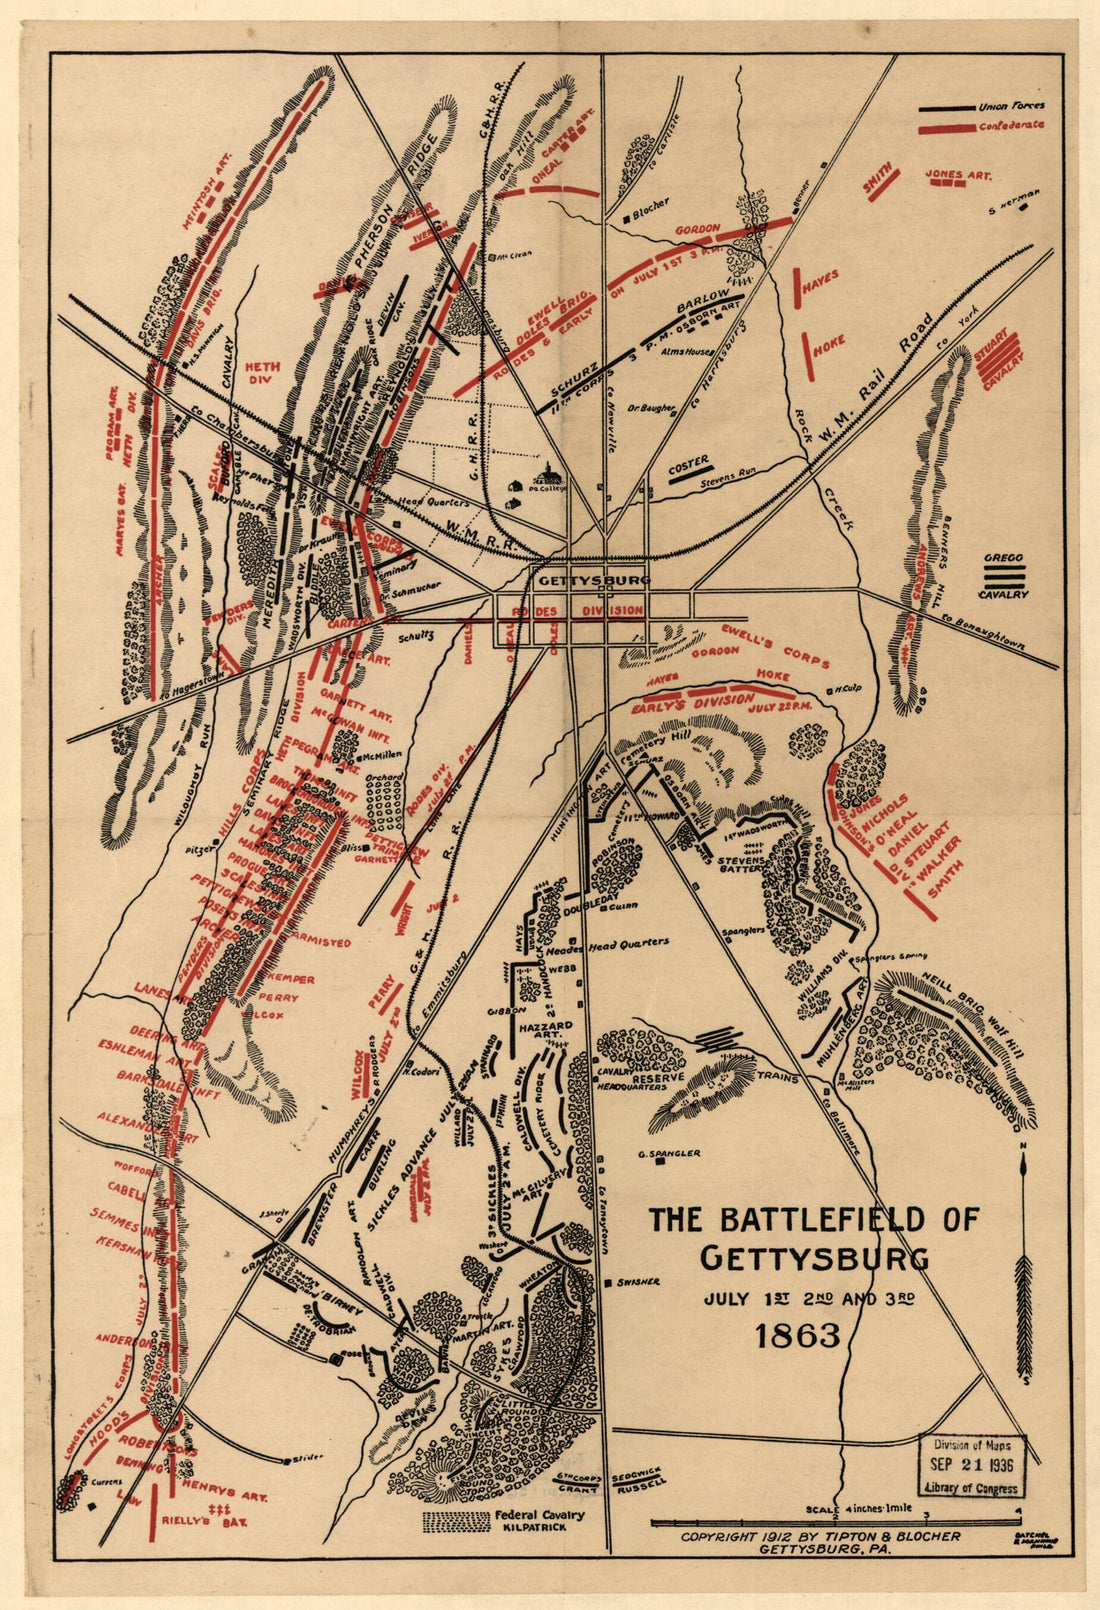 This old map of The Battlefield of Gettysburg, July 1st, 2nd and 3rd from 1863 was created by  Tipton and Blocher in 1863